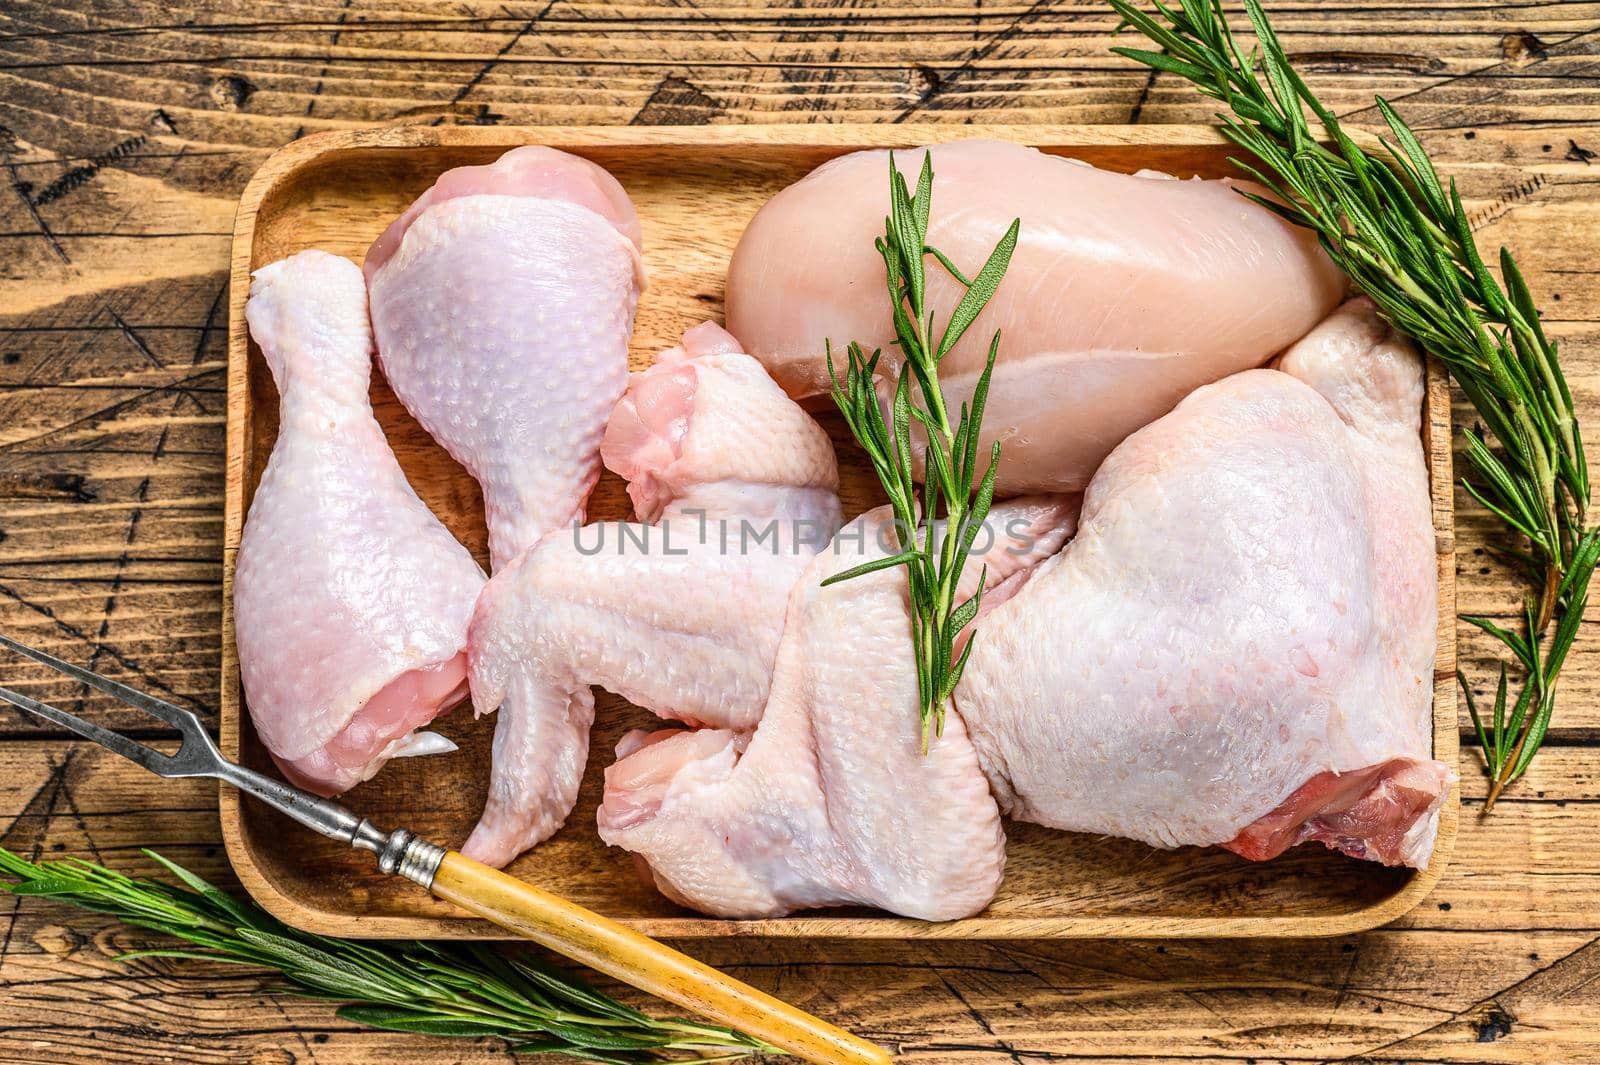 Fresh raw chicken meat, wings, breast, thigh and drumsticks on a wooden tray. Wooden background. Top view by Composter